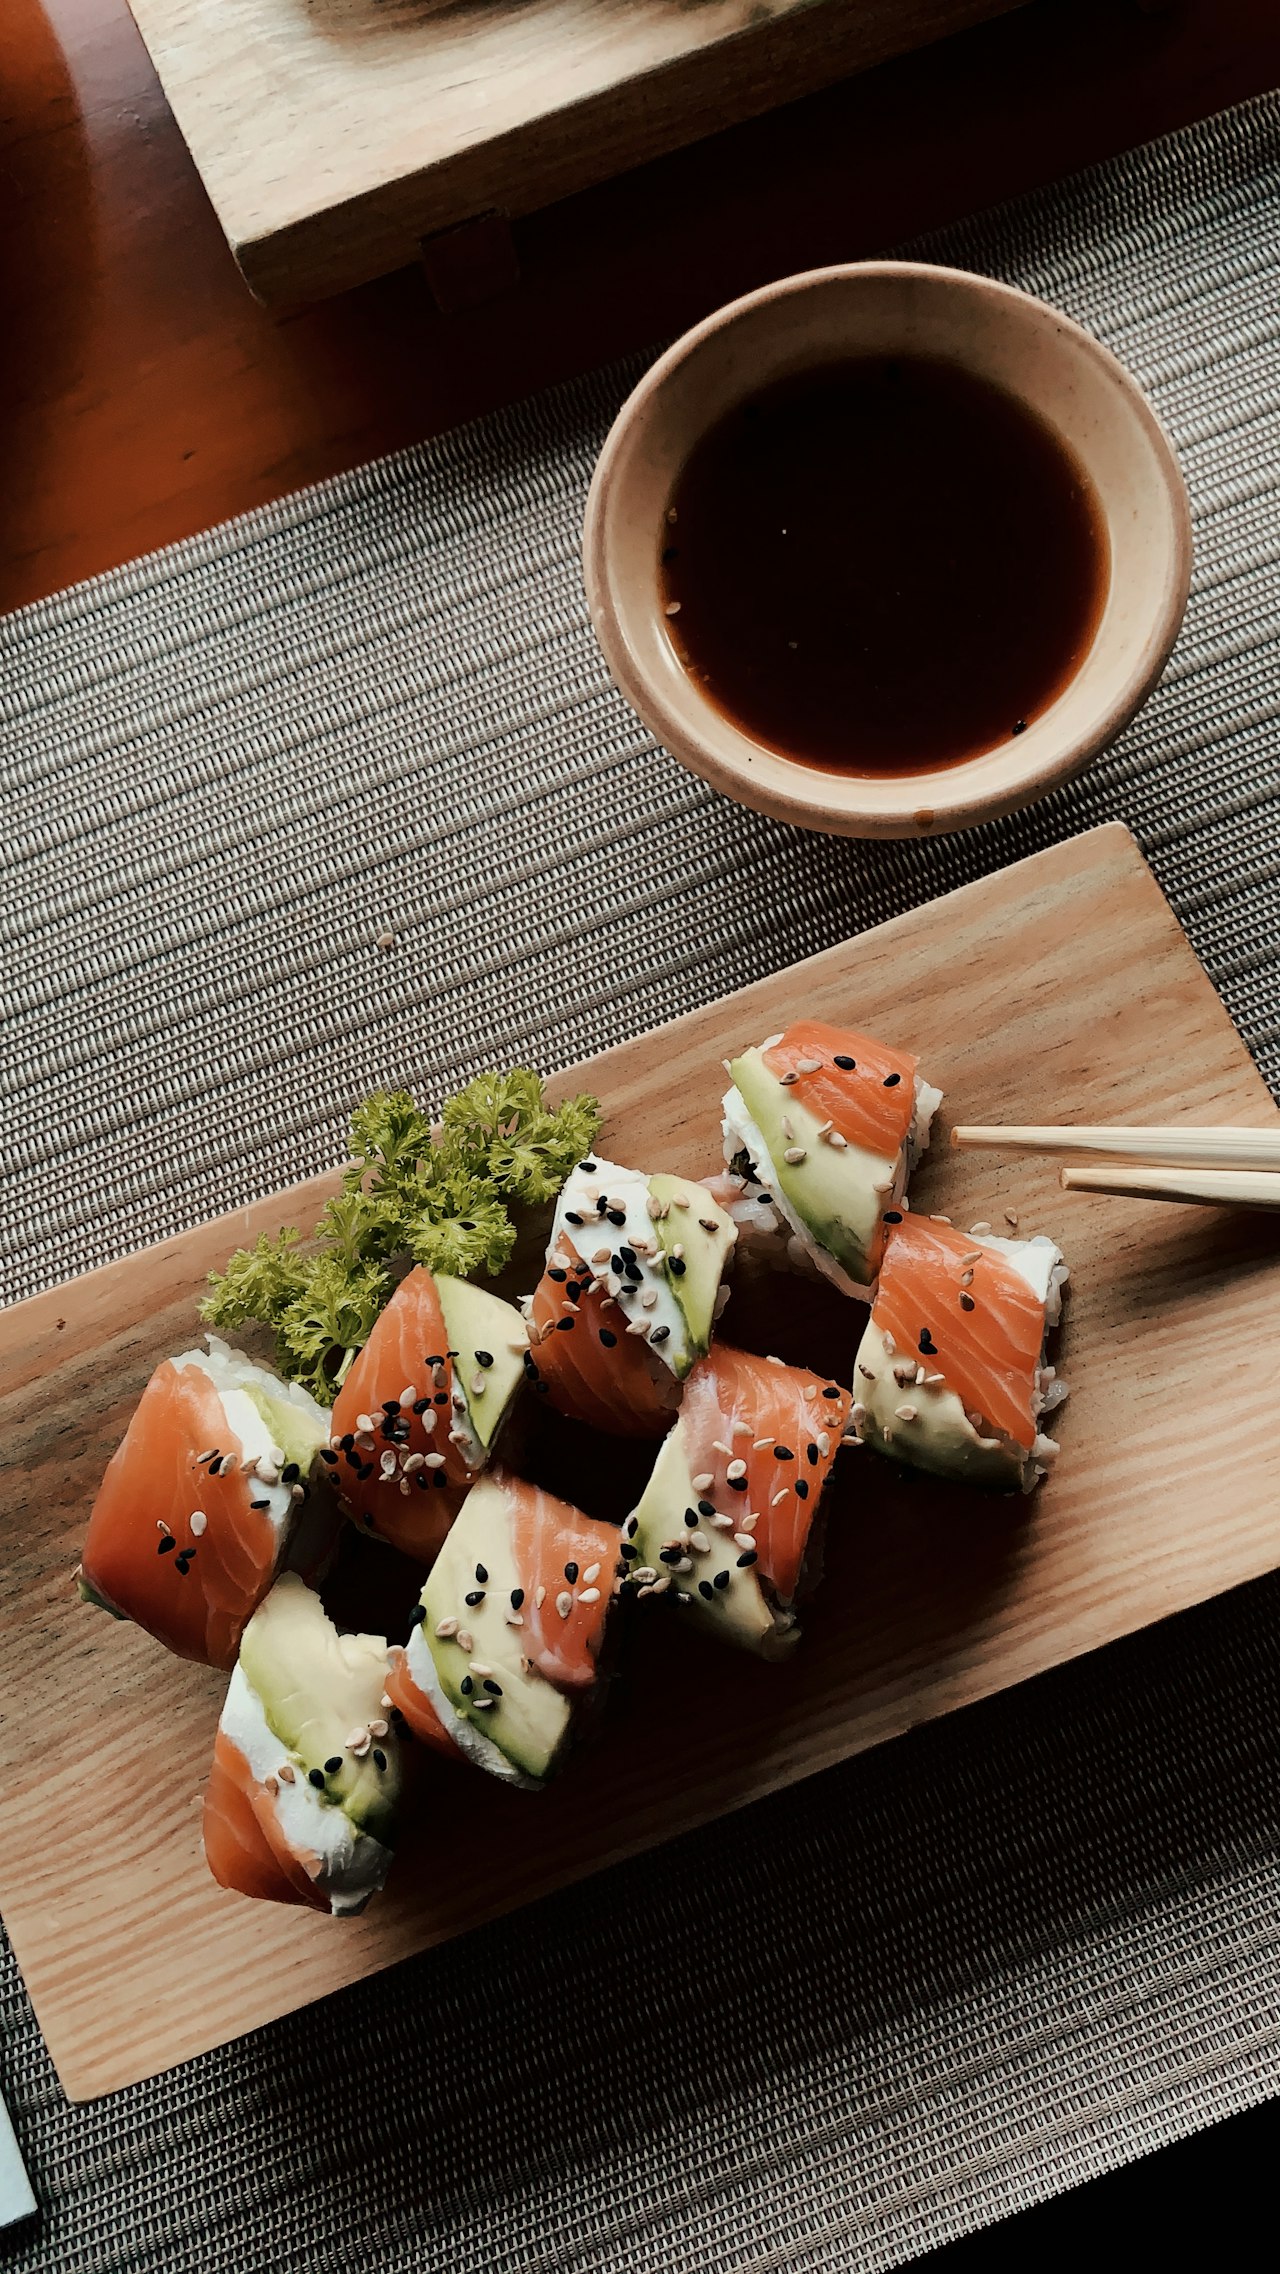 Where to Get Takeout Sushi Rolls in the Bay Area?